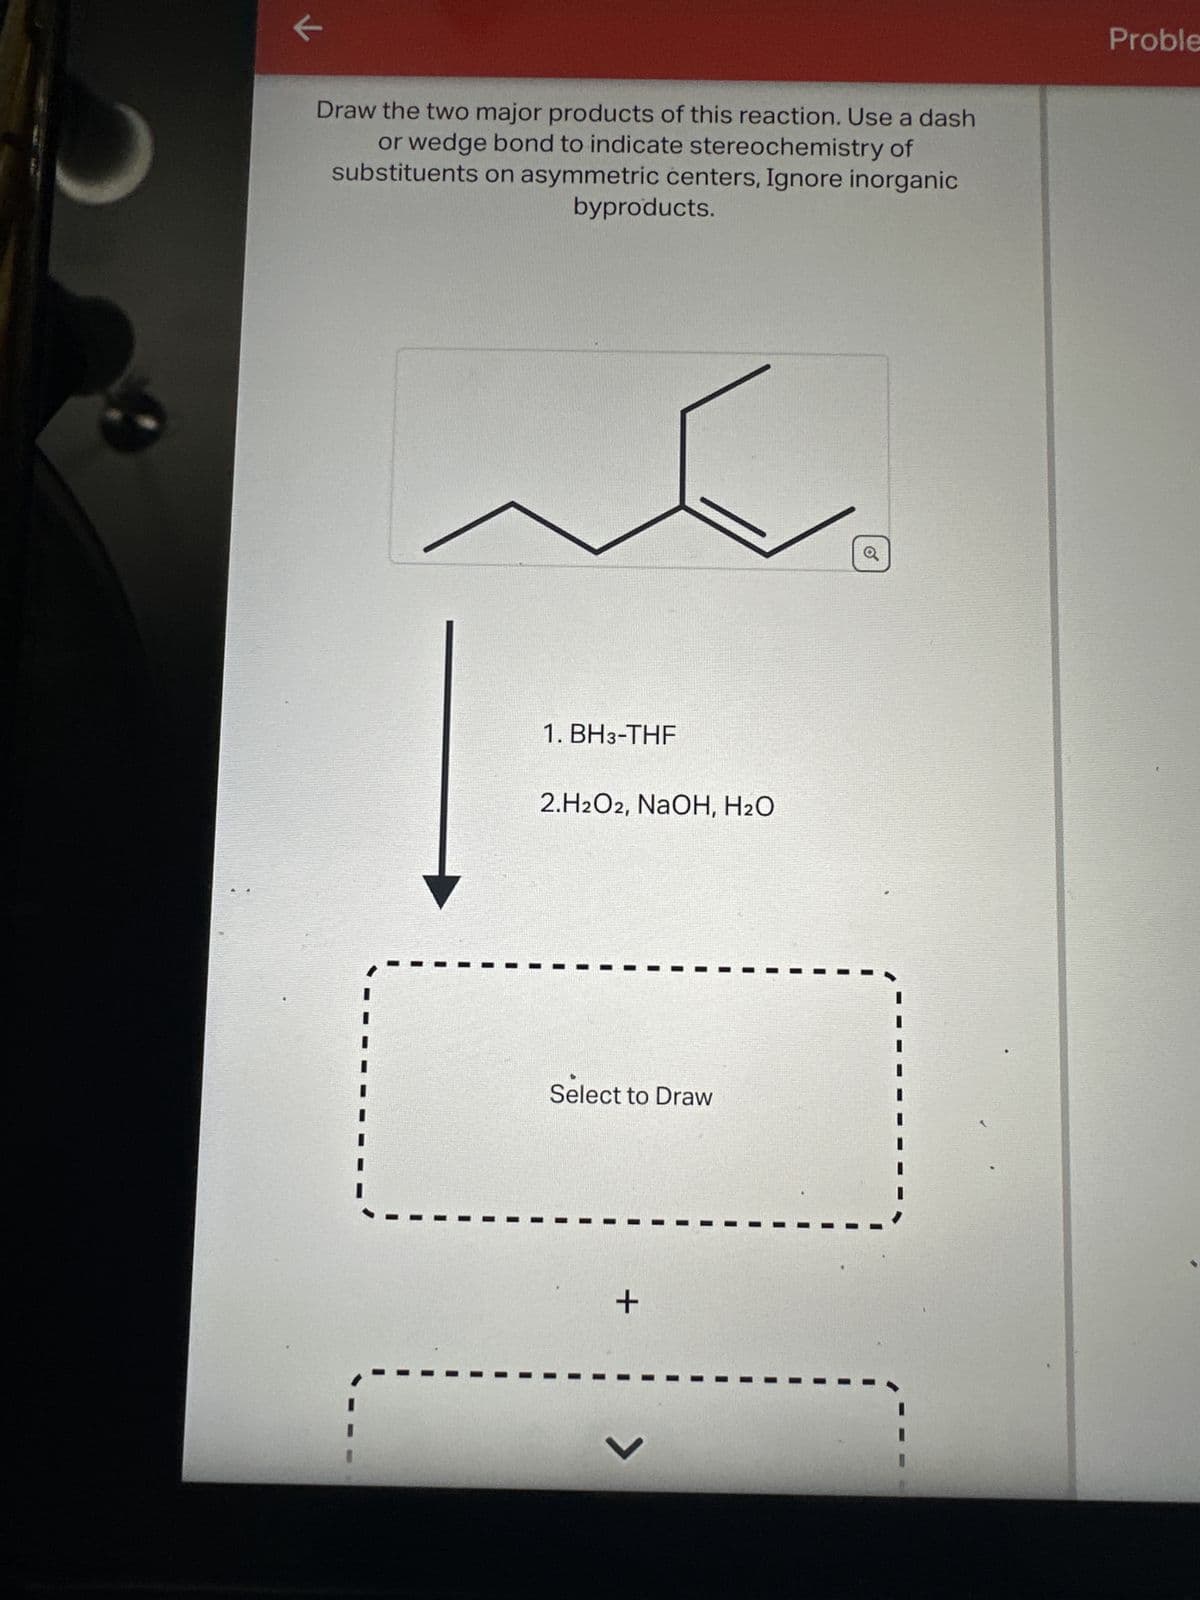 C
←
1750
Draw the two major products of this reaction. Use a dash
or wedge bond to indicate stereochemistry of
substituents on asymmetric centers, Ignore inorganic
byproducts.
1. BH3-THF
2.H2O2, NaOH, H₂O
Select to Draw
+
V
o
Proble